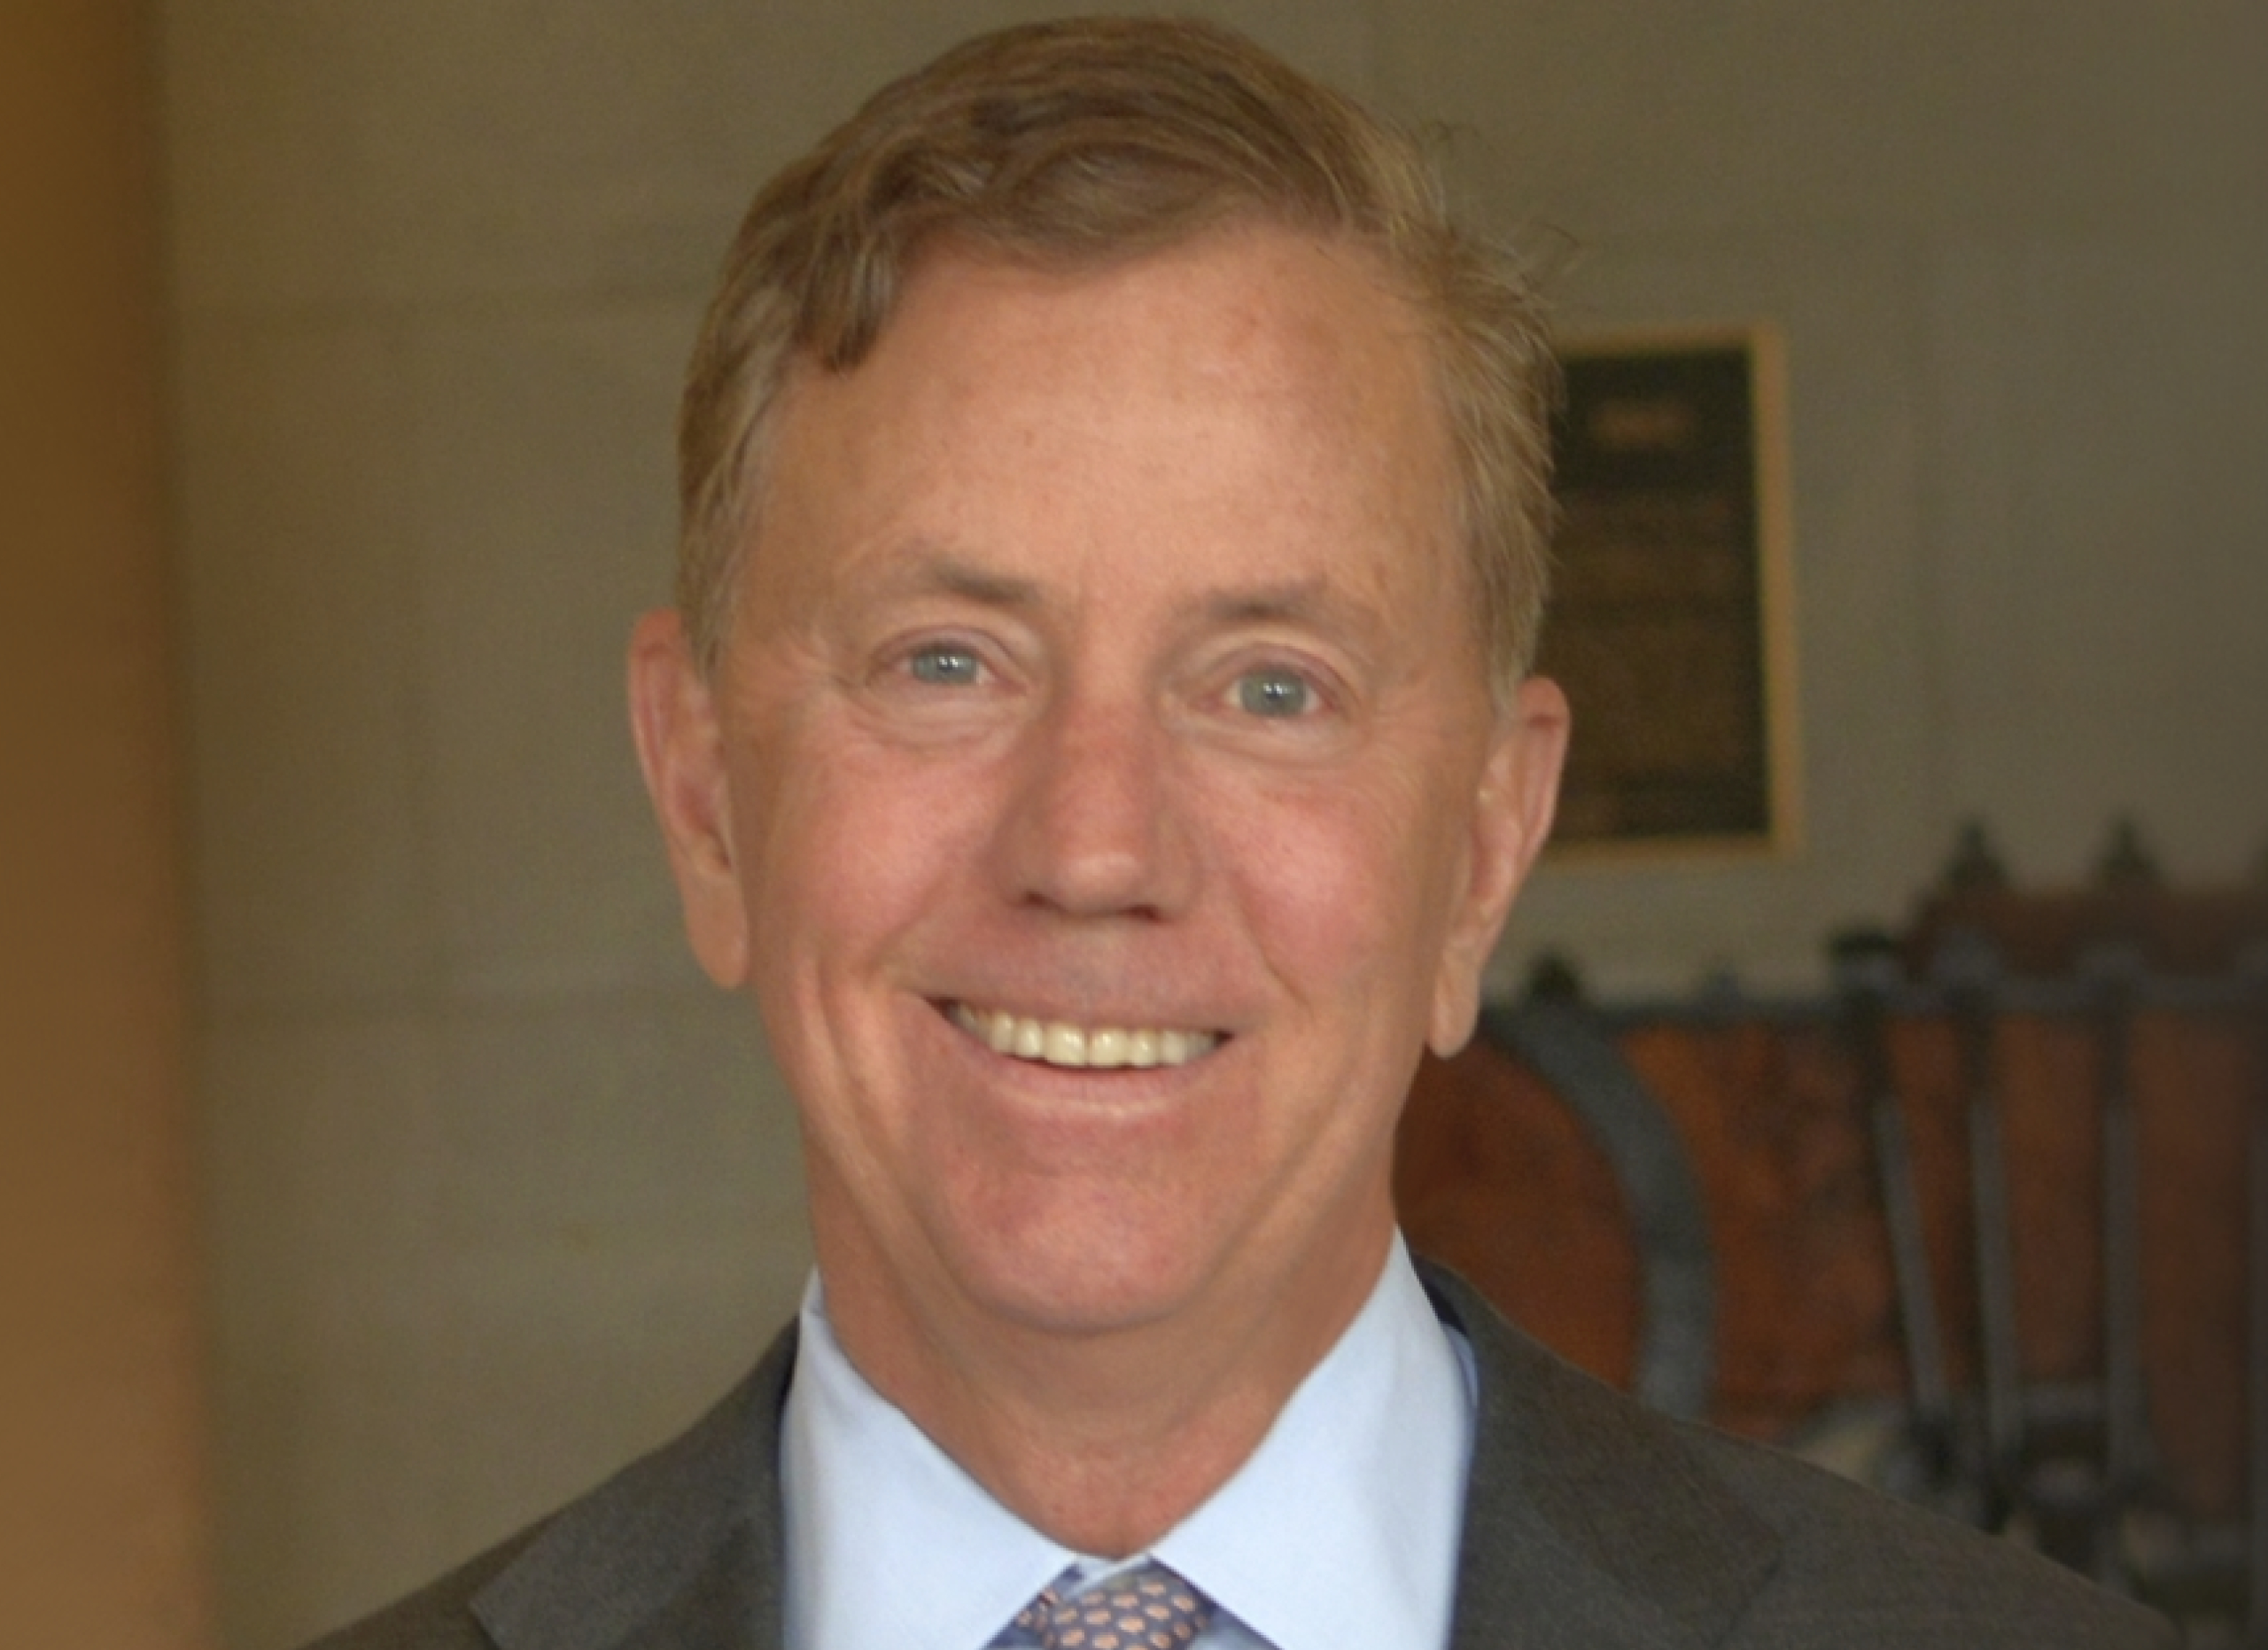 Gov. Lamont has issued 6th highest number of executive orders in the country